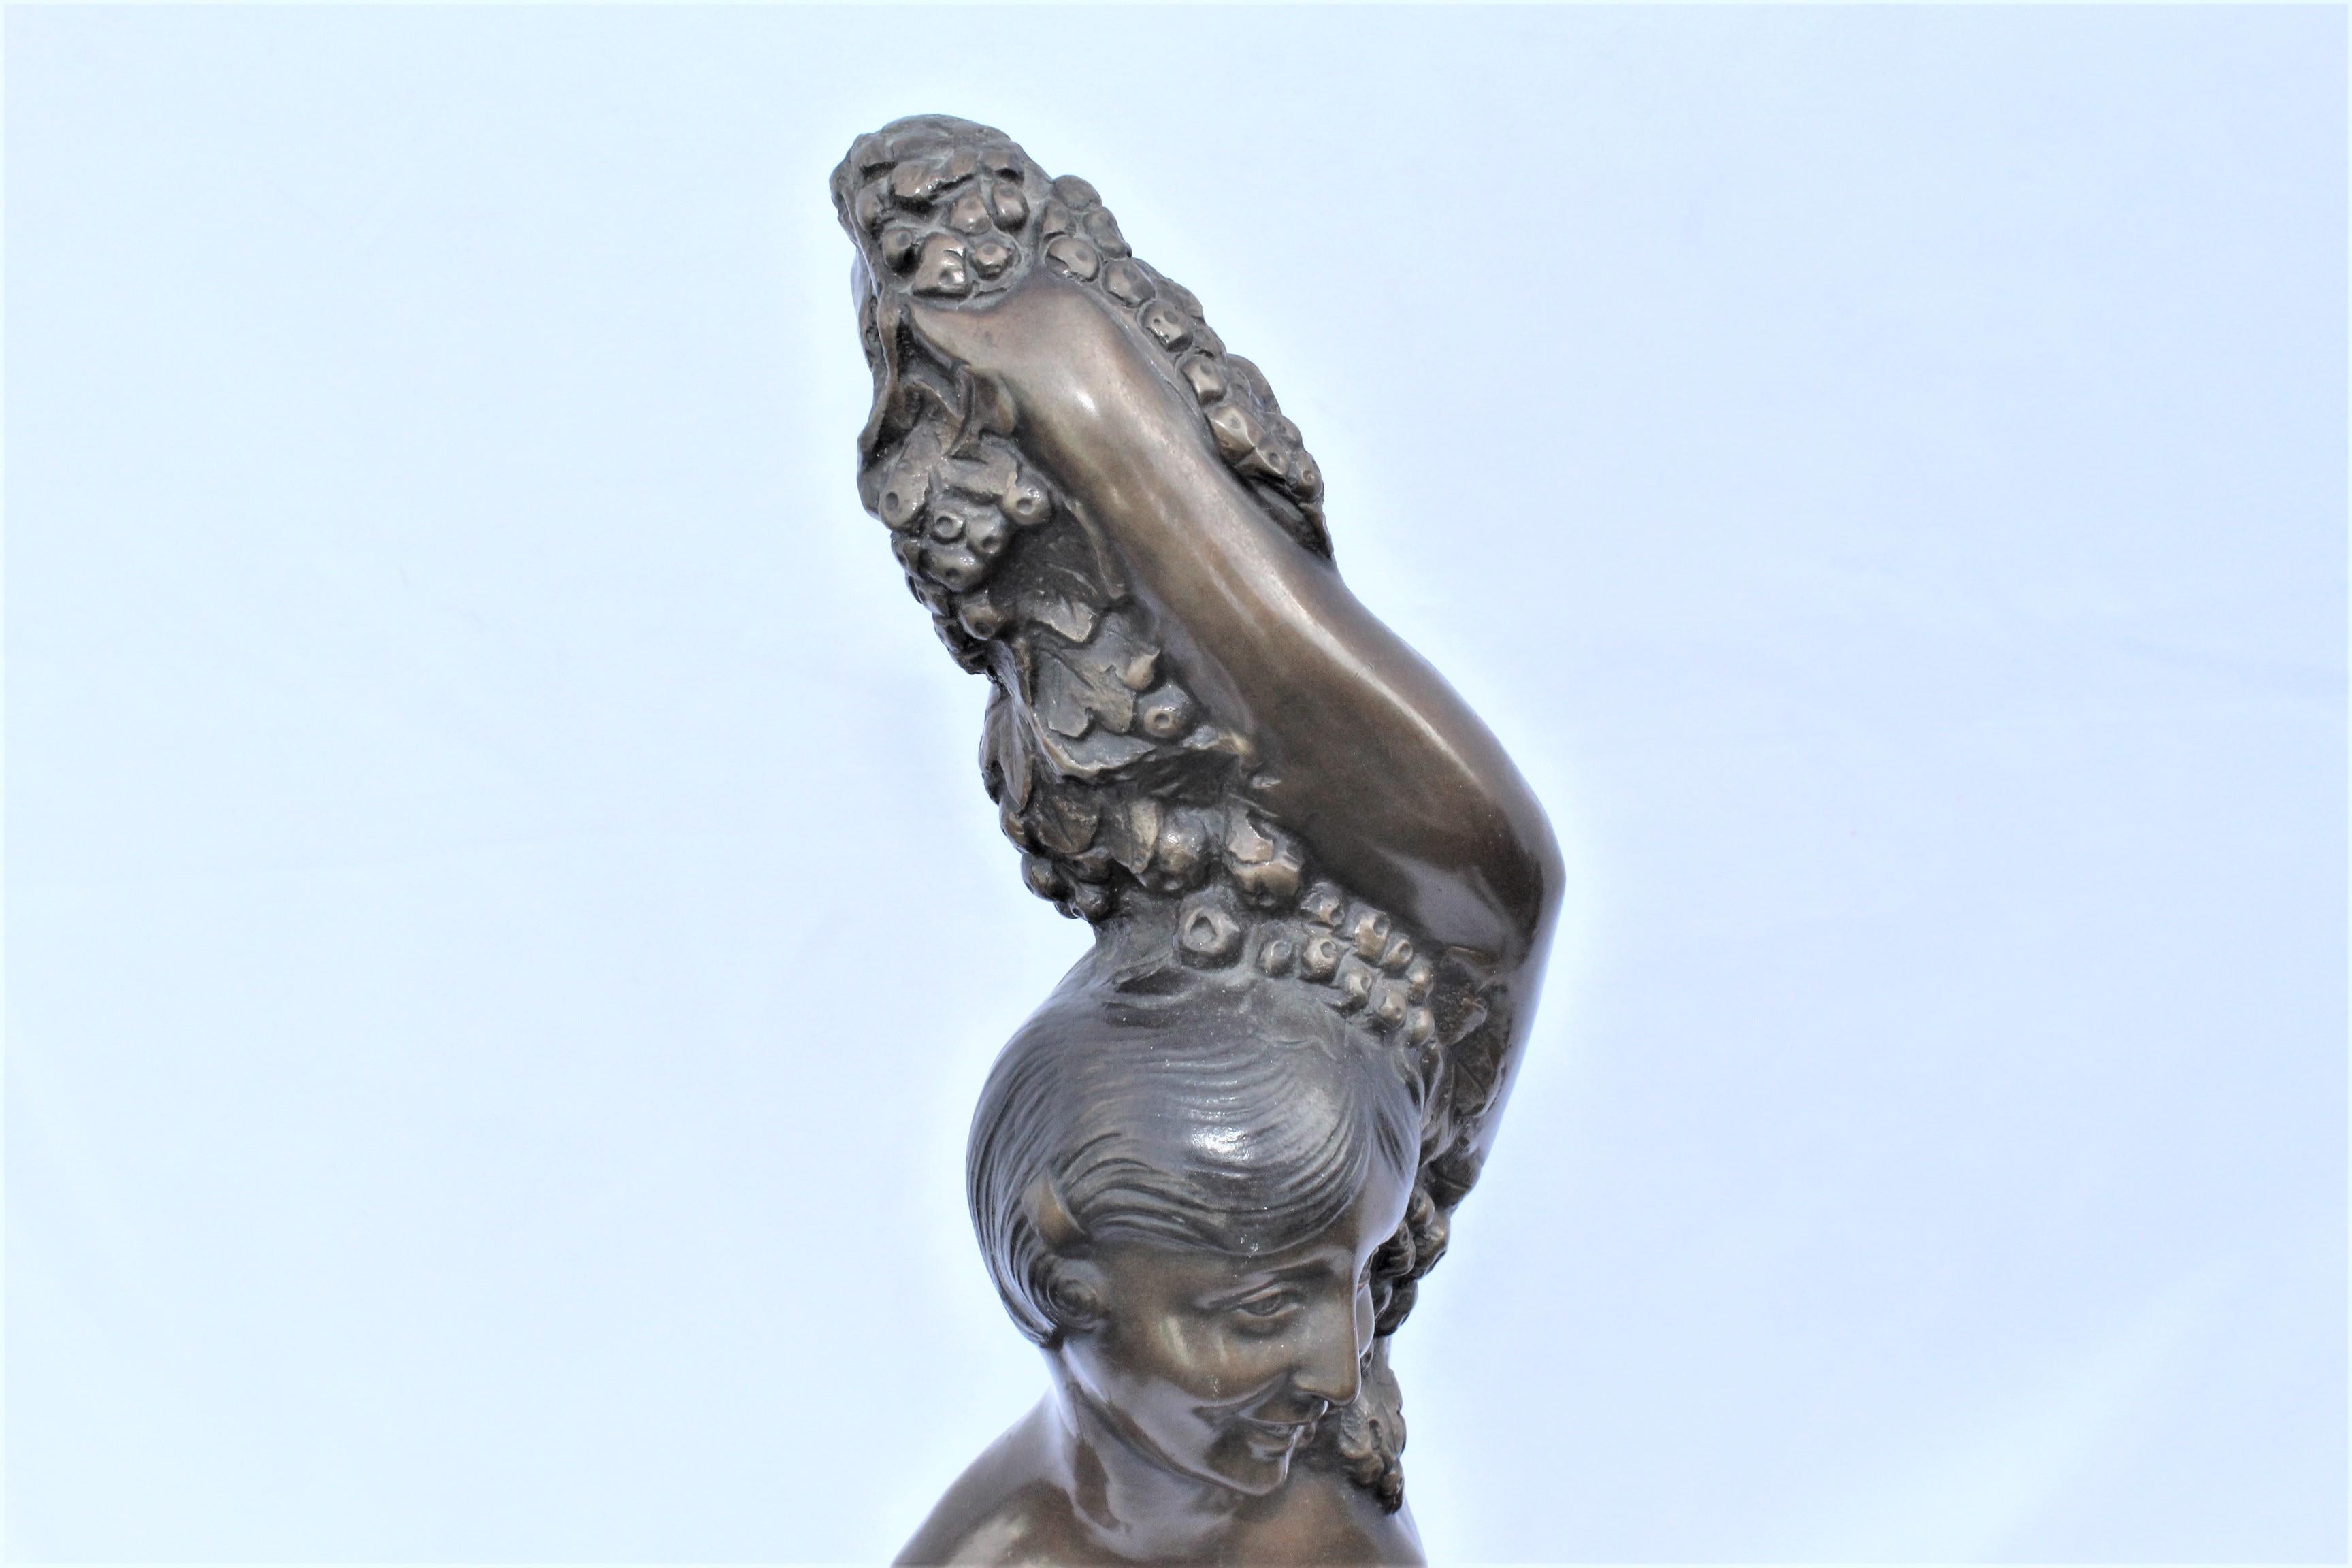 A nice size bronze casting of a semi-nude girl seated with small child and a dog holding a bunch of Flowers. Large size with multi-patinas with great details. Mounted on a solid block of marble base. Has the signature on back side. Heavy item. Heavy